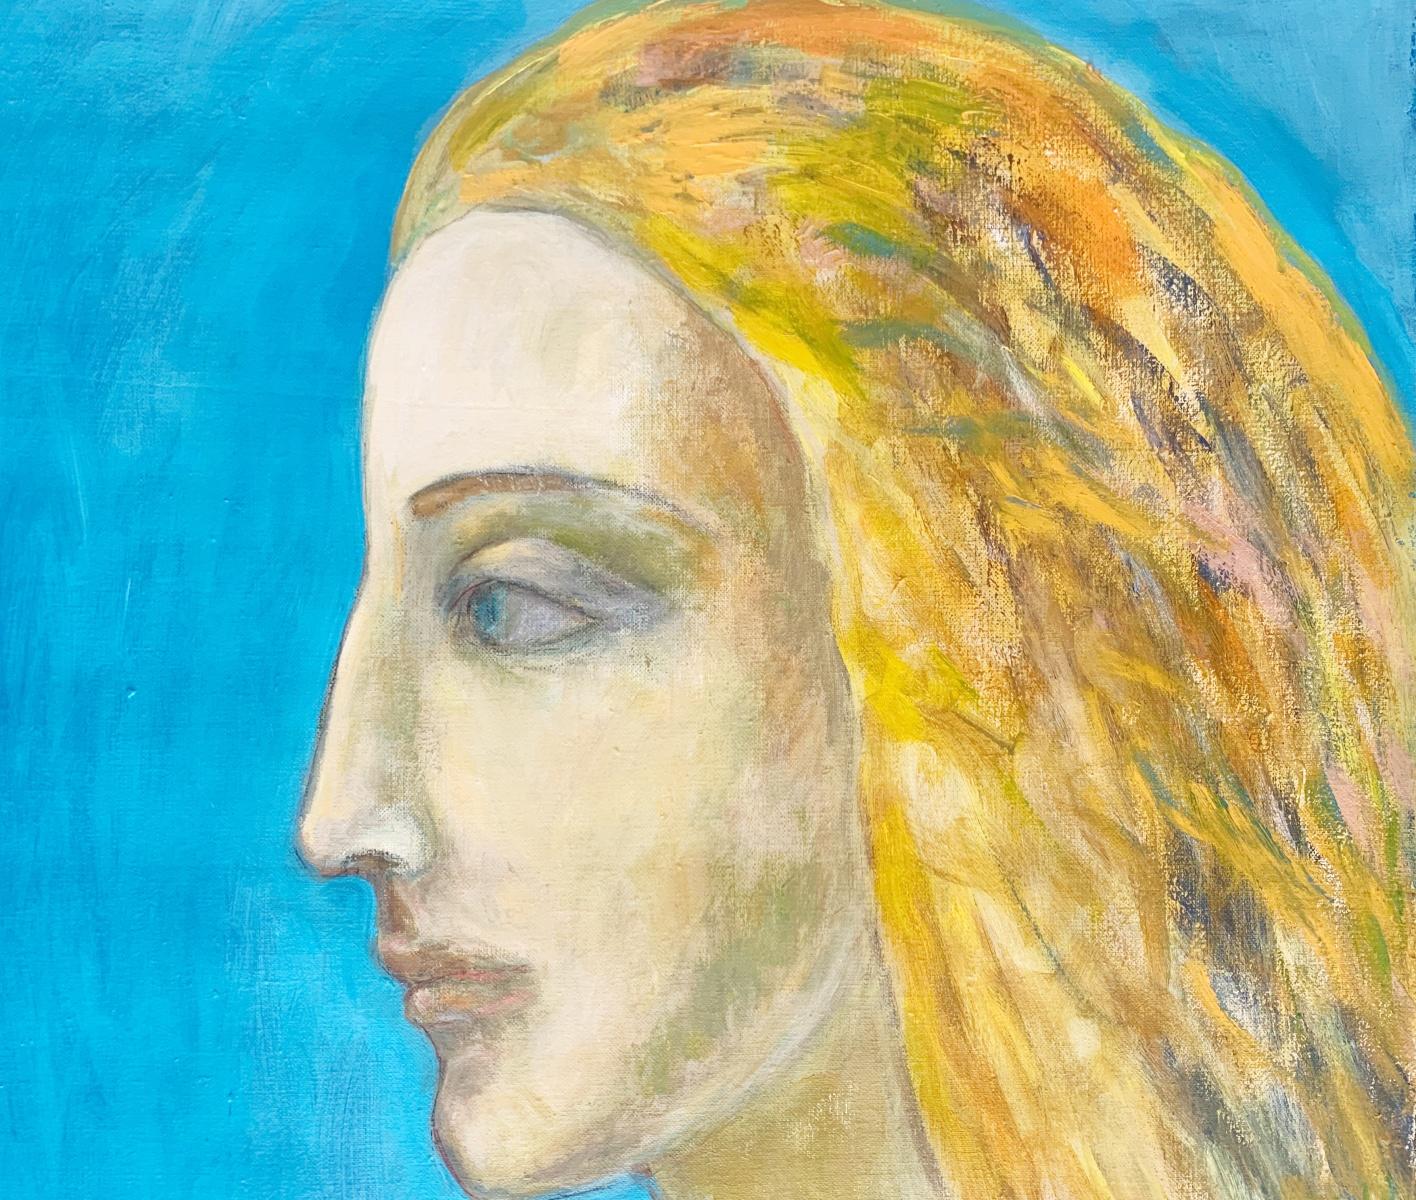 Contemporary oil on canvas figurative painting by Iszchan Nazarian. Painting depicts side profile portrait of a long haired angel without their's wings visible in a frame. The style of artwork is faux naive. Colors used are vibrant blue, yellow and